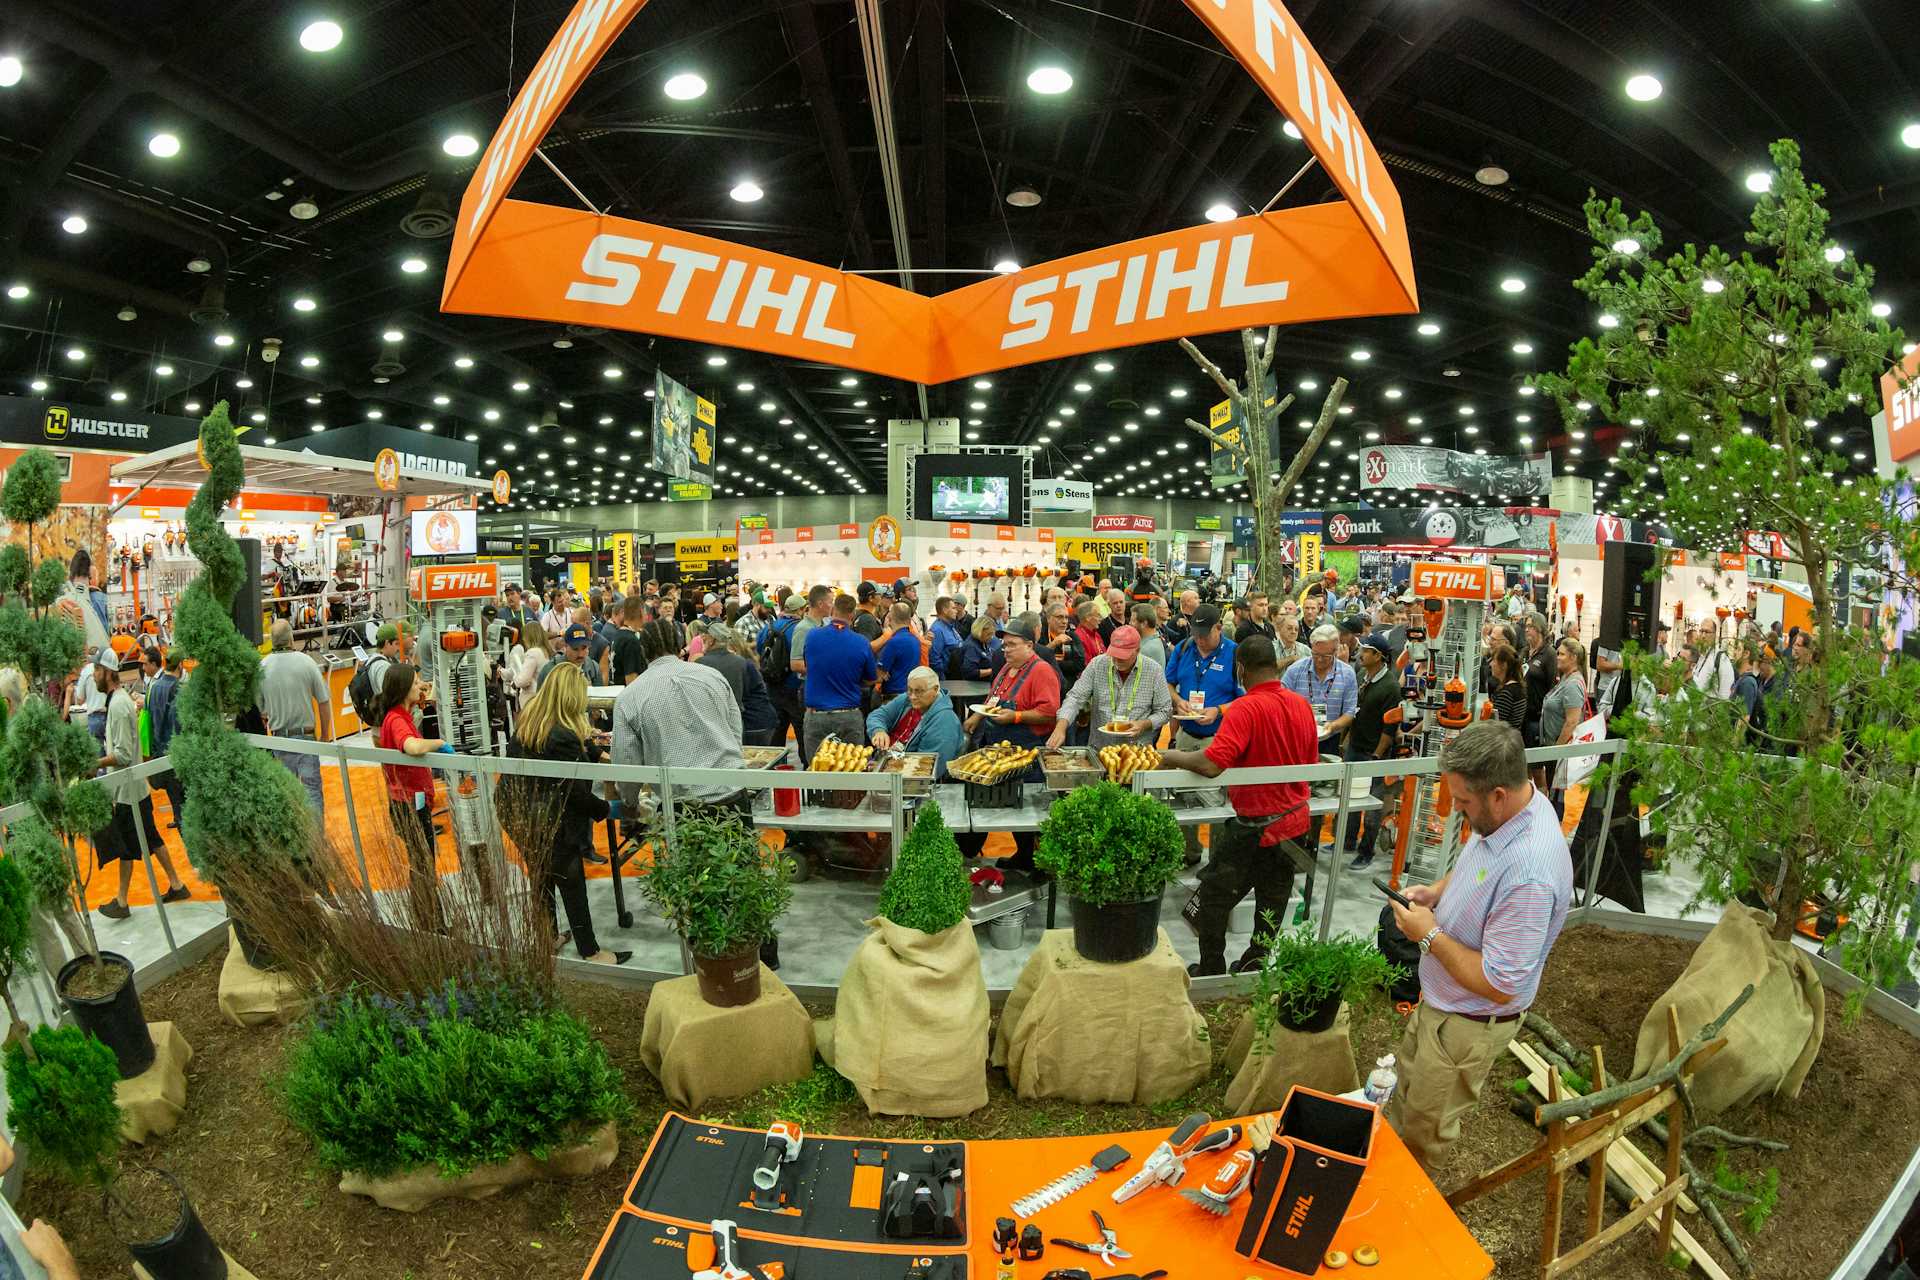 It’s a Sell Out! Equip Exposition and Hardscape North America Announce Every Inch of Available Exhibit Space Will be Occupied-8d6610a0-ff26-4827-bb5a-684a799769eb